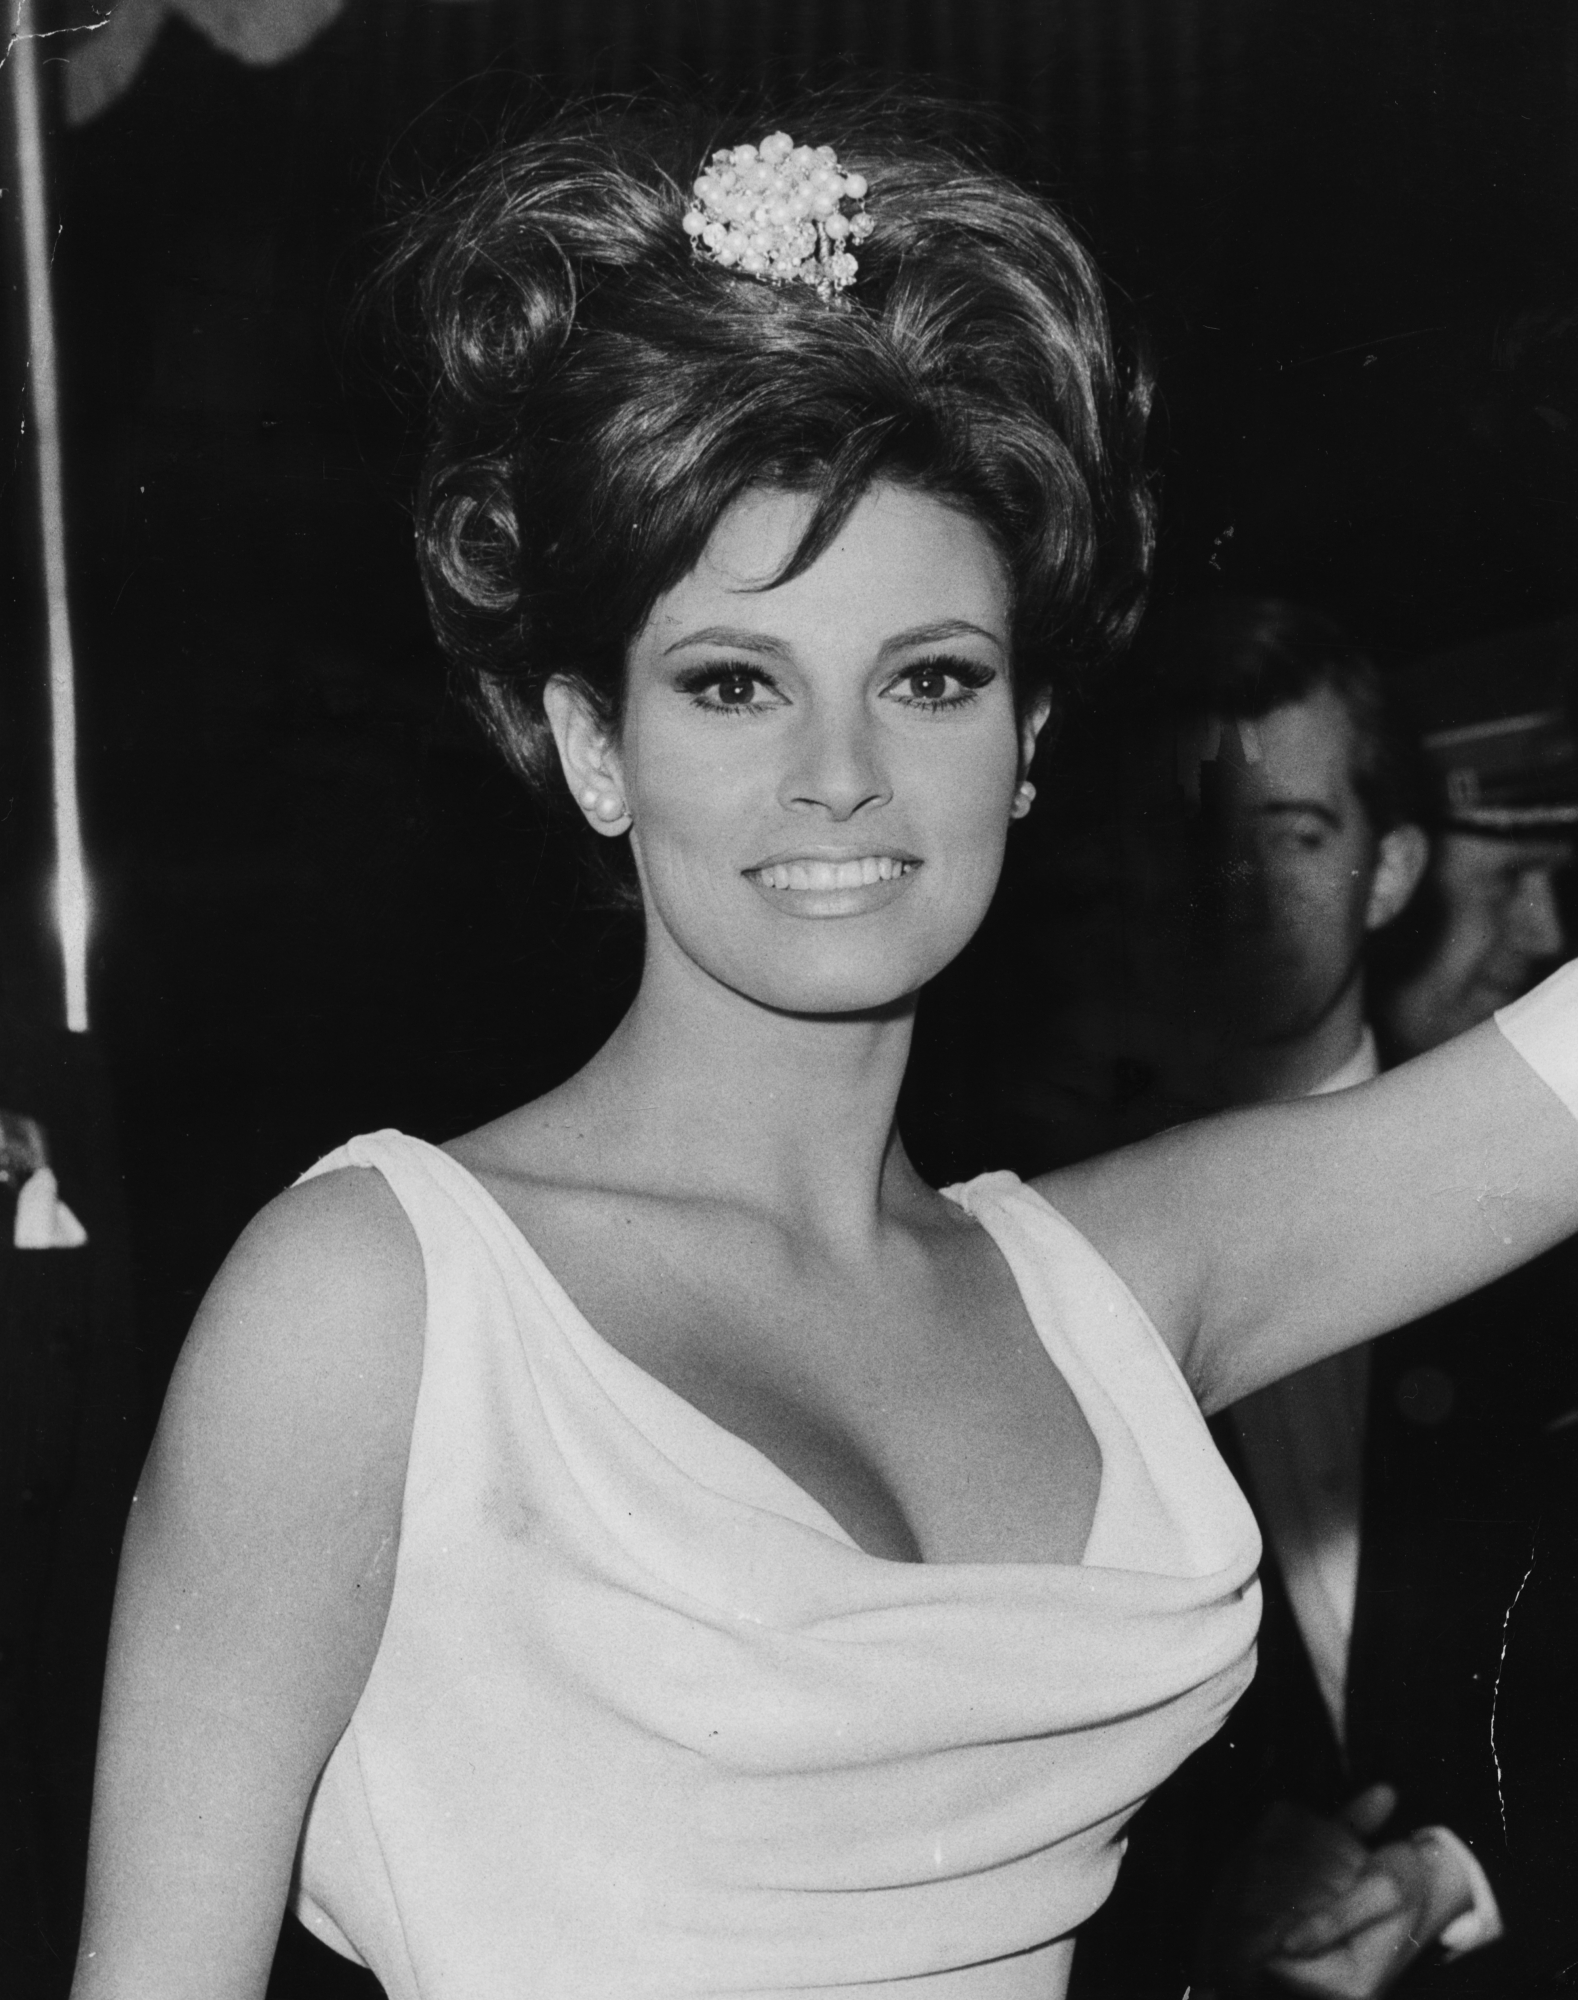 ?FILE - FEBRUARY 15, 2023:  Actress Raquel Welch has died at the age of 82 after a brief illness Actress Raquel Welch attending the Royal Film Performance at the Odeon, Leicester Square, London, March 14th 1966. (Photo by Leonard Burt/Central Press/Getty Images)